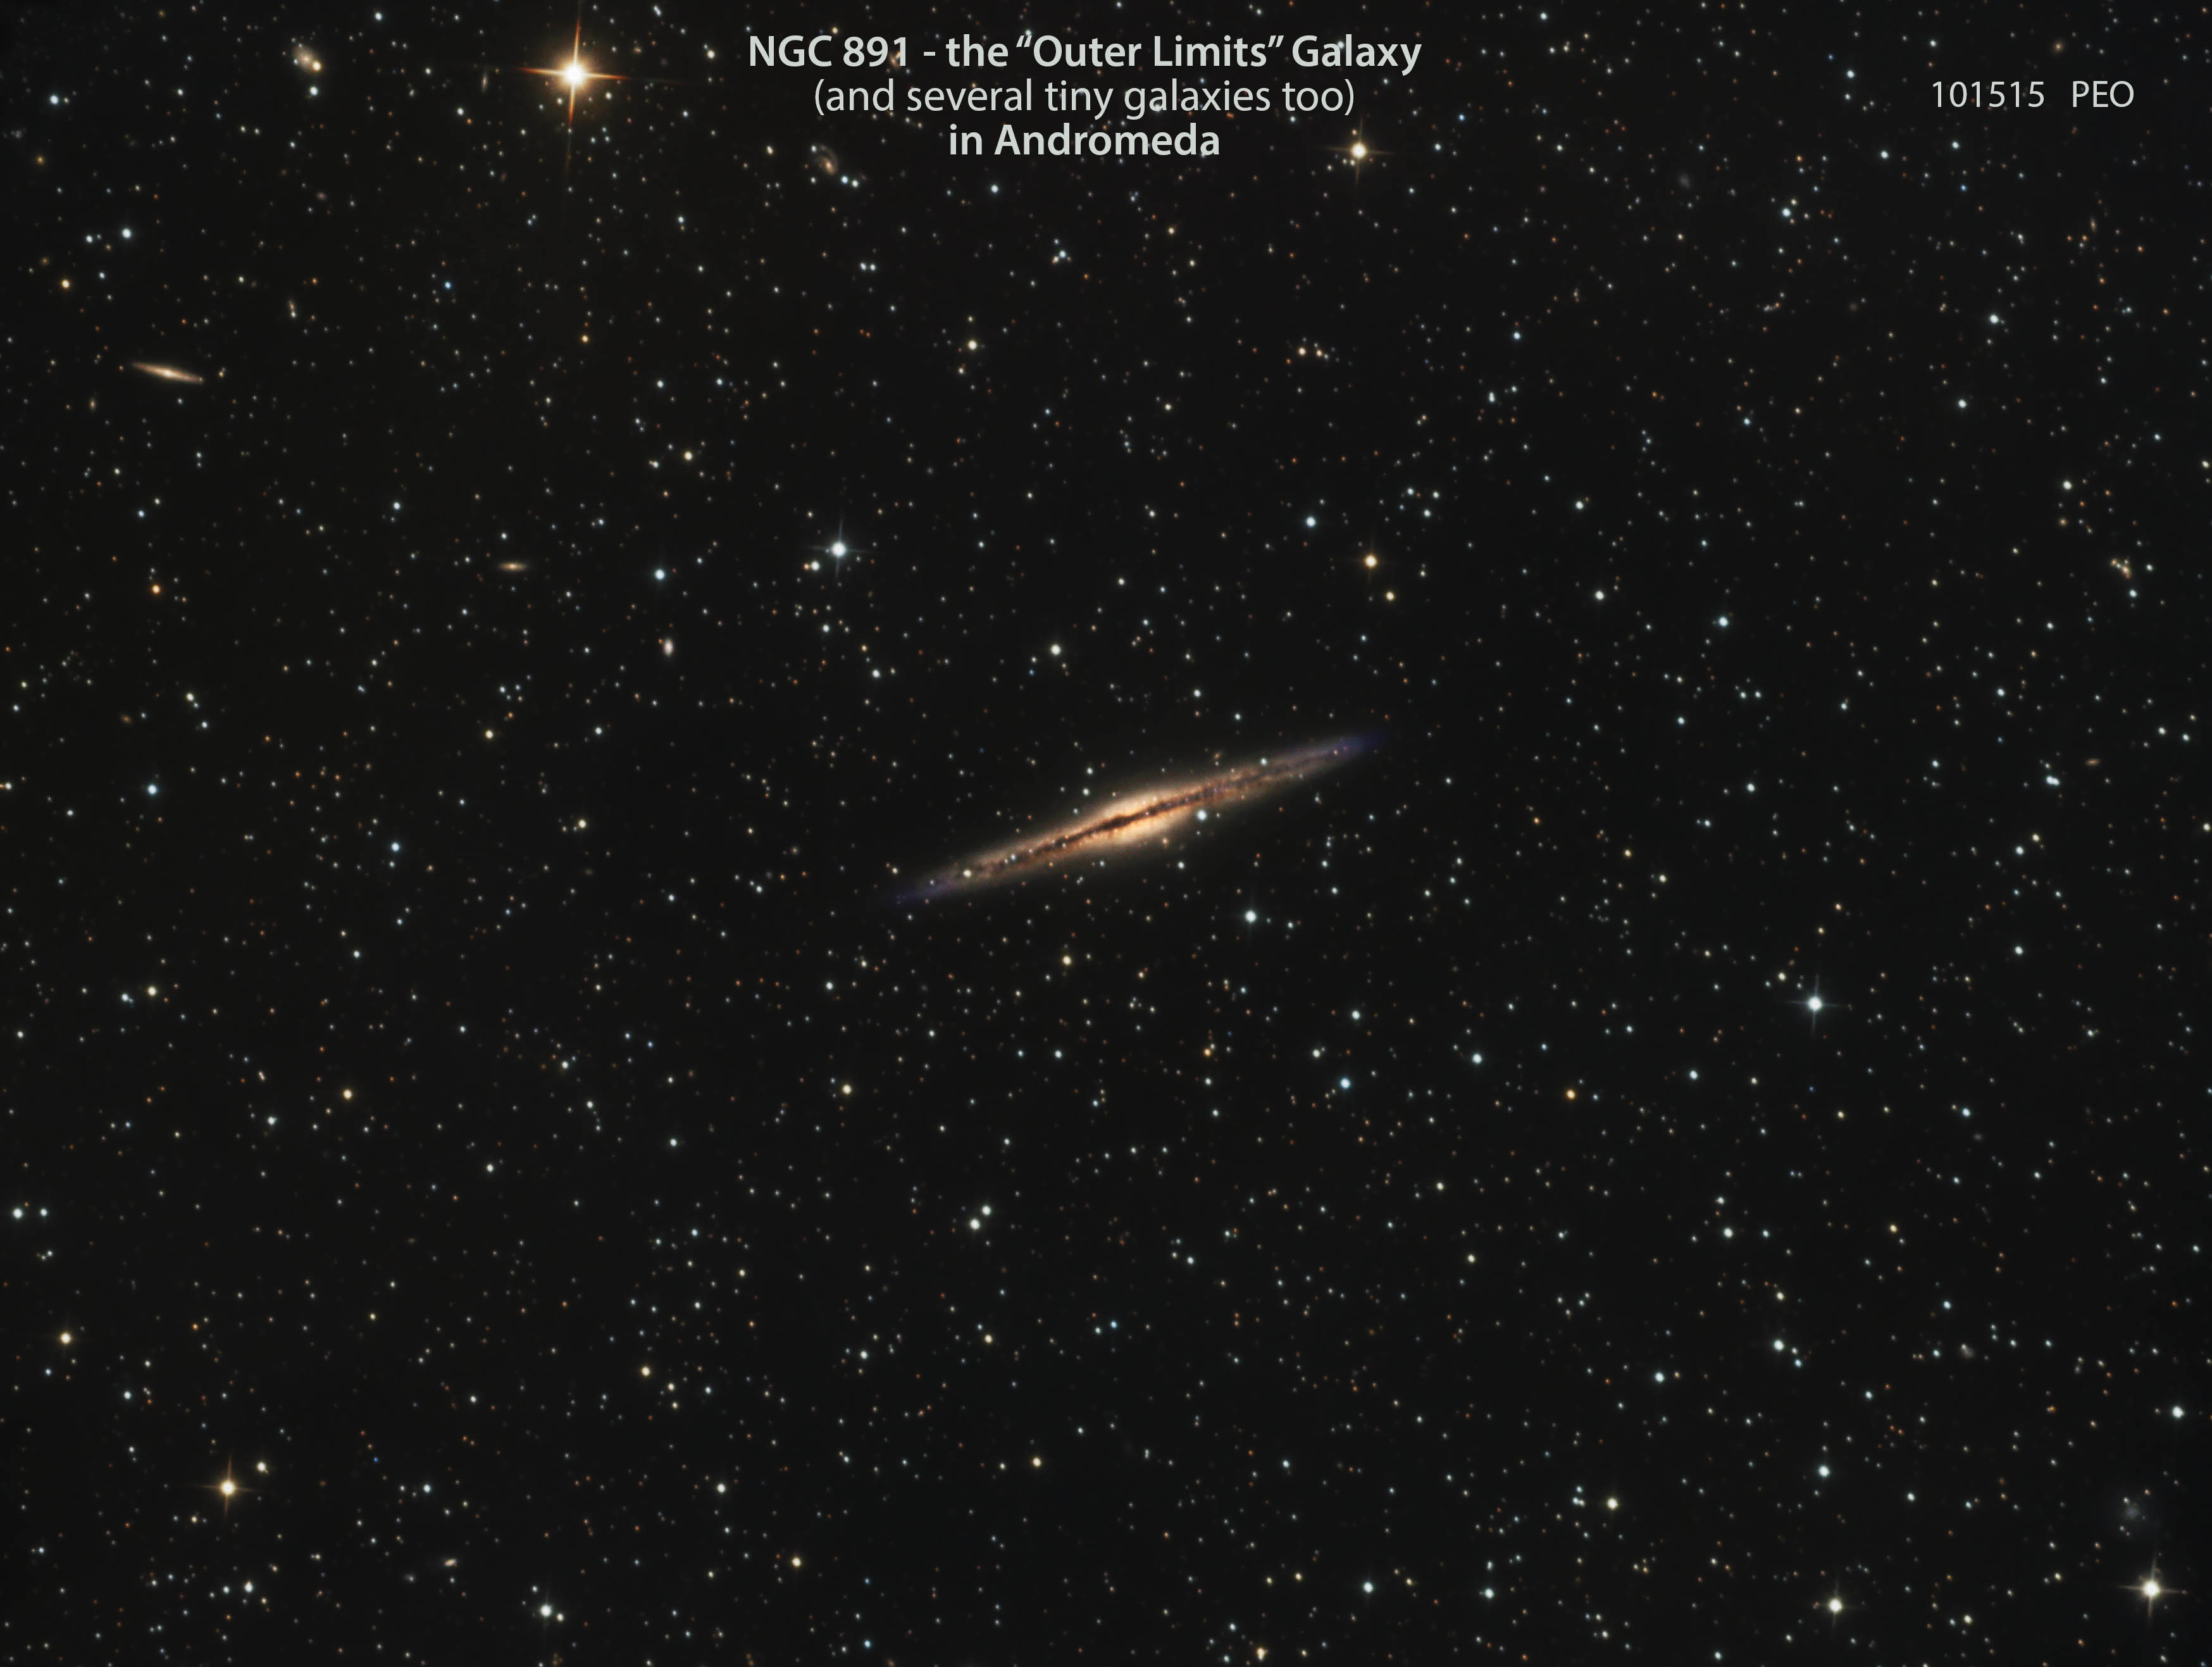 NGC891 -- the Outer Limits Galaxy